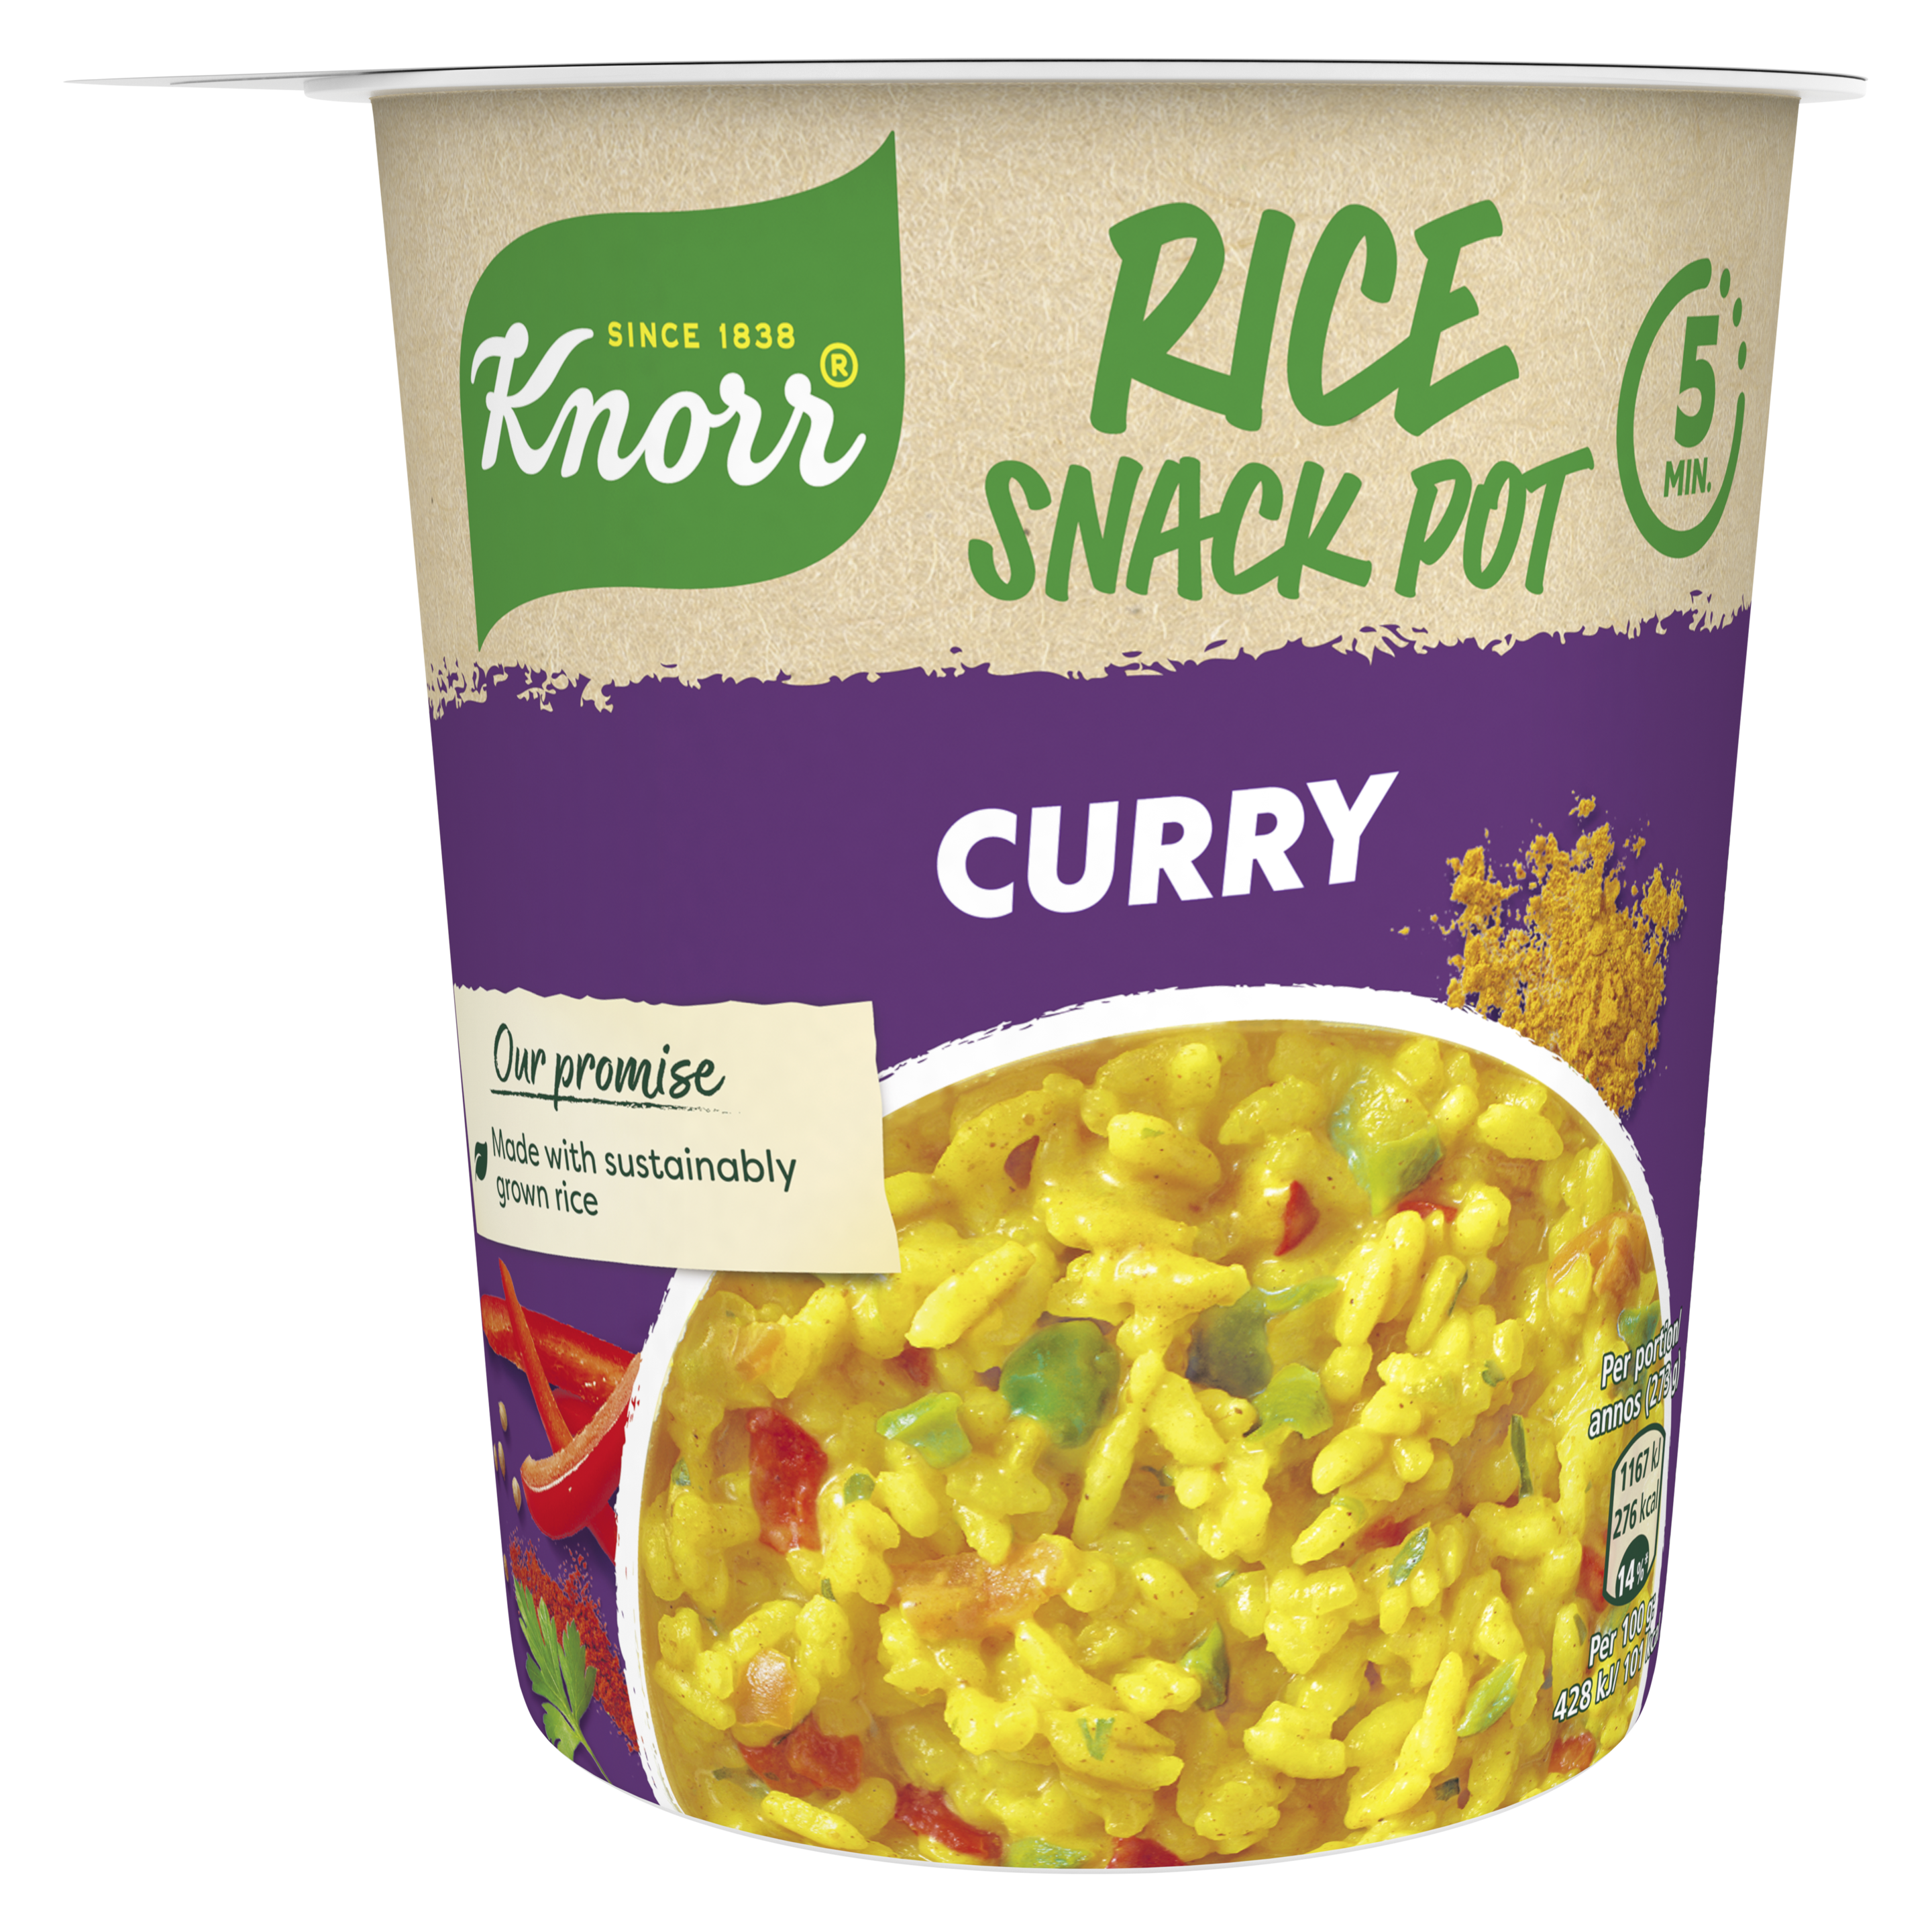 Snack Pot Rice Curry